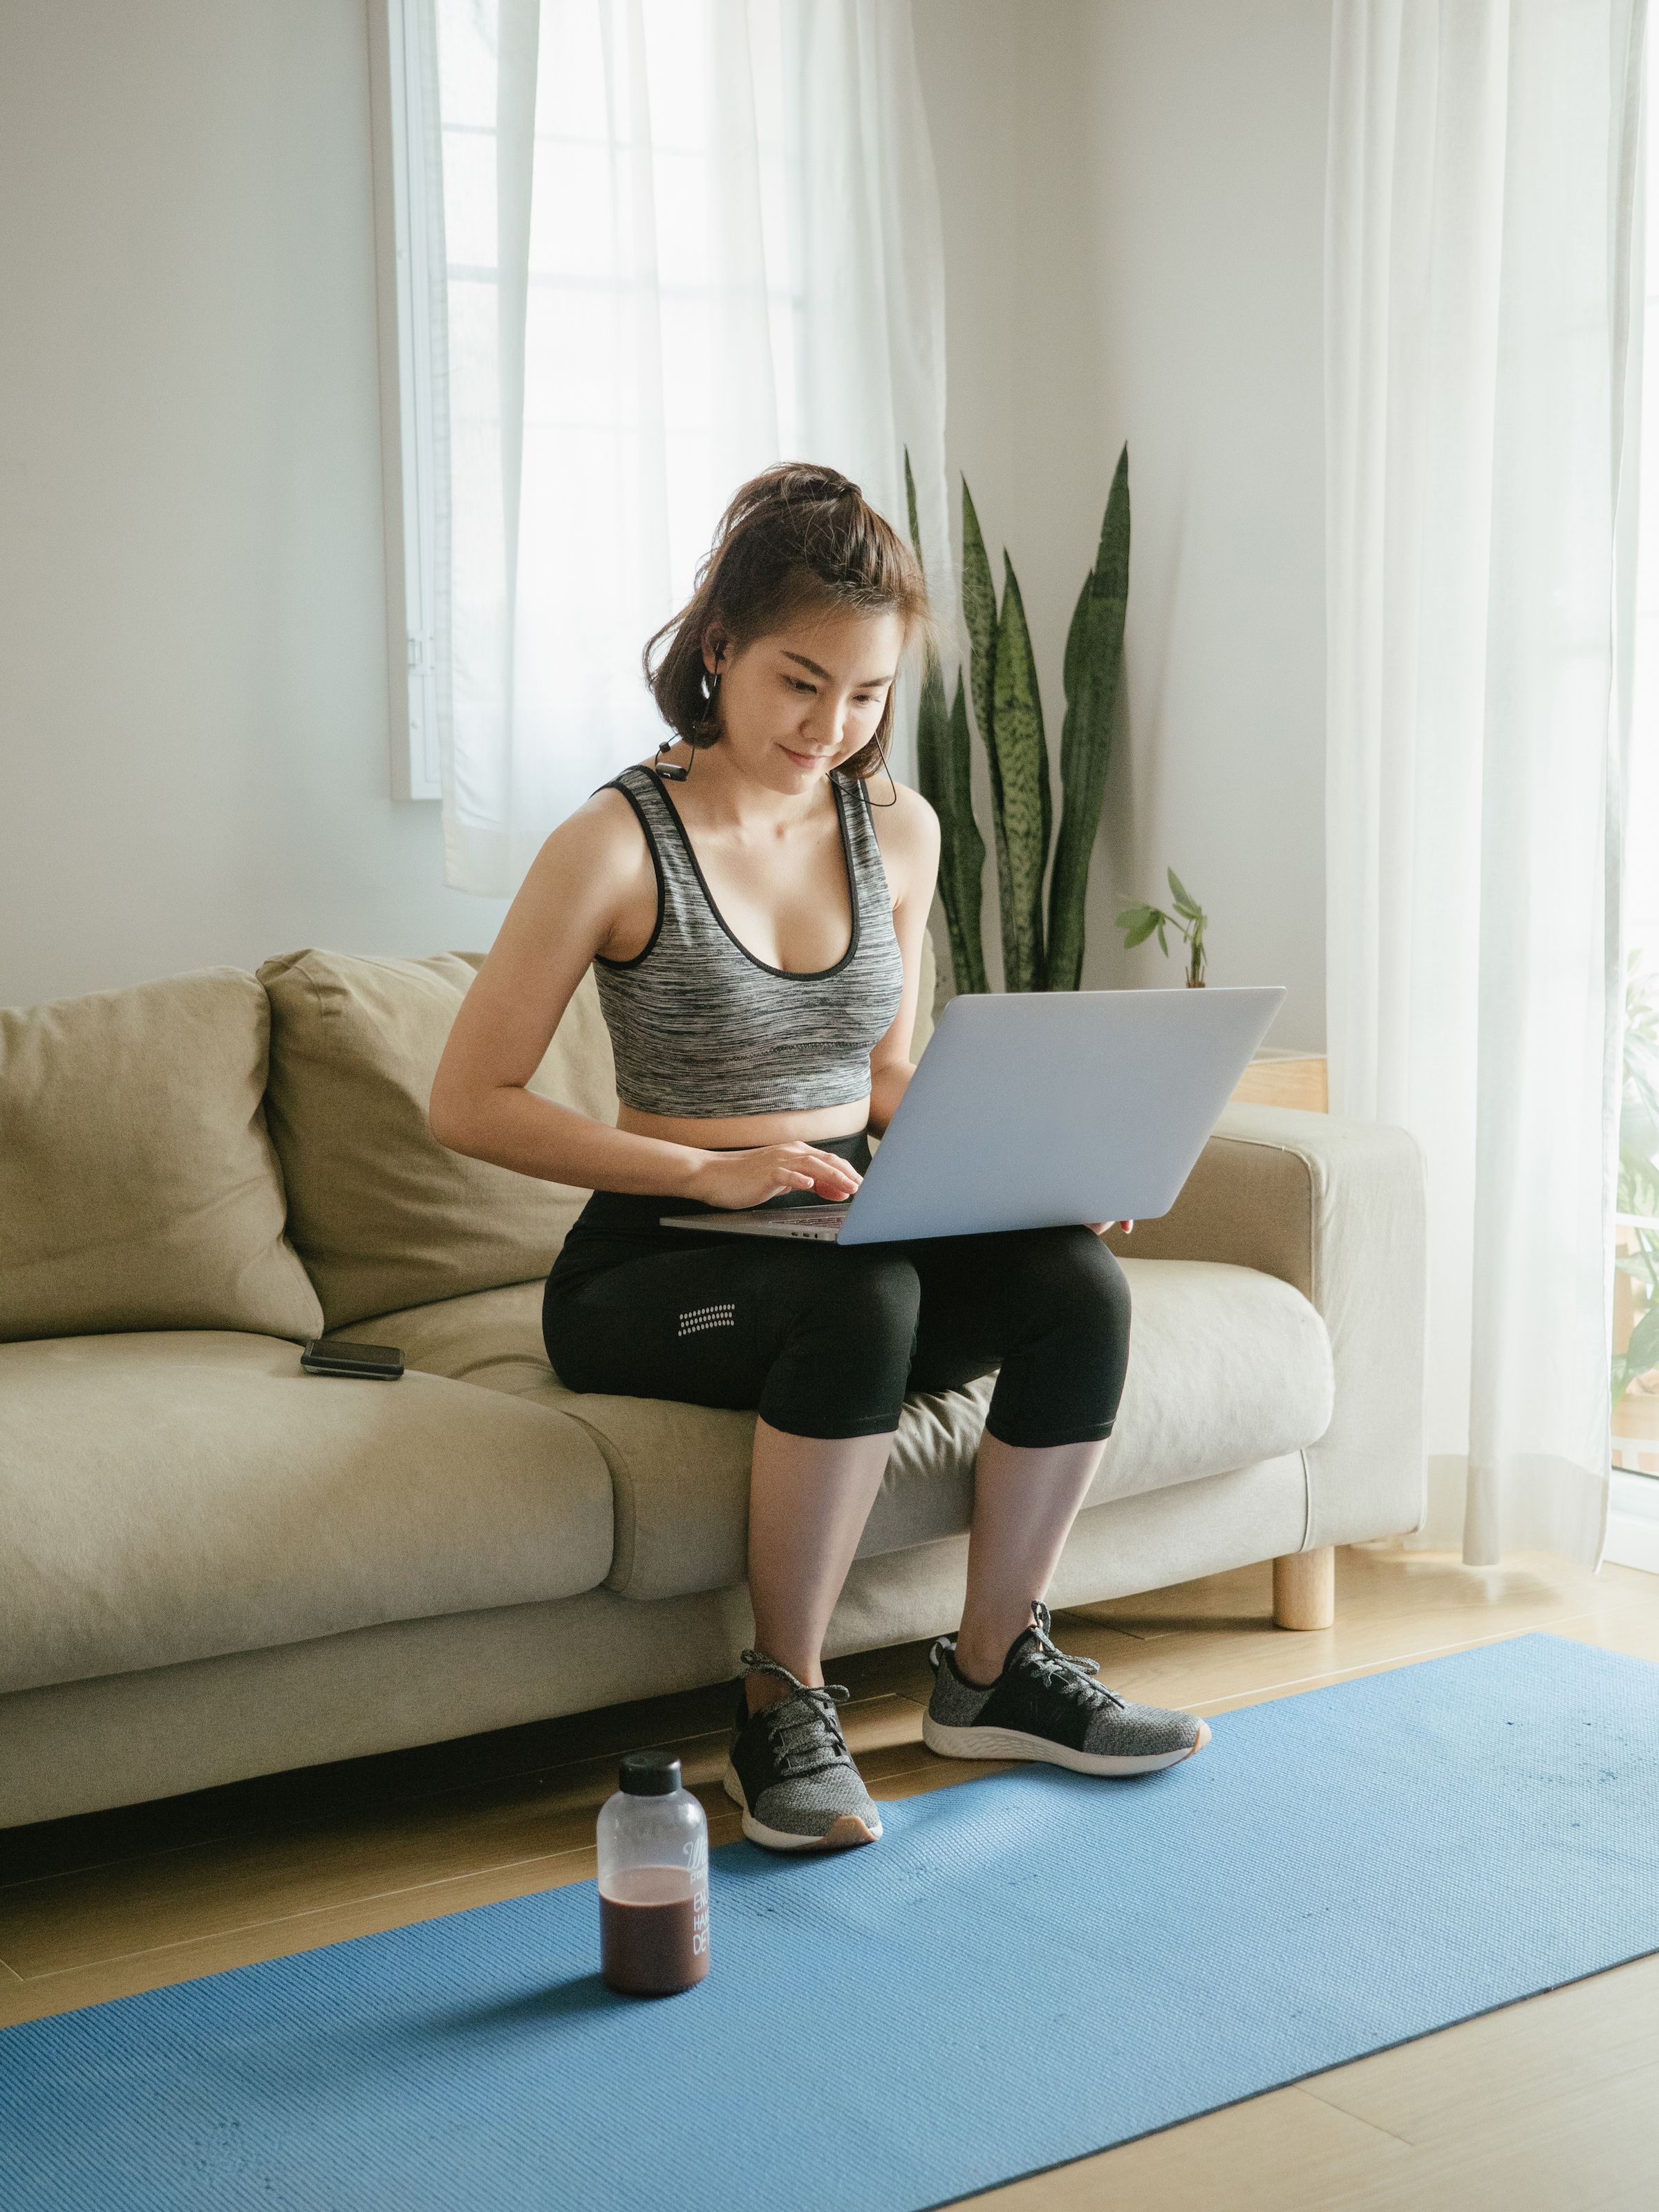 Online personal trainers: Are they really worth it?